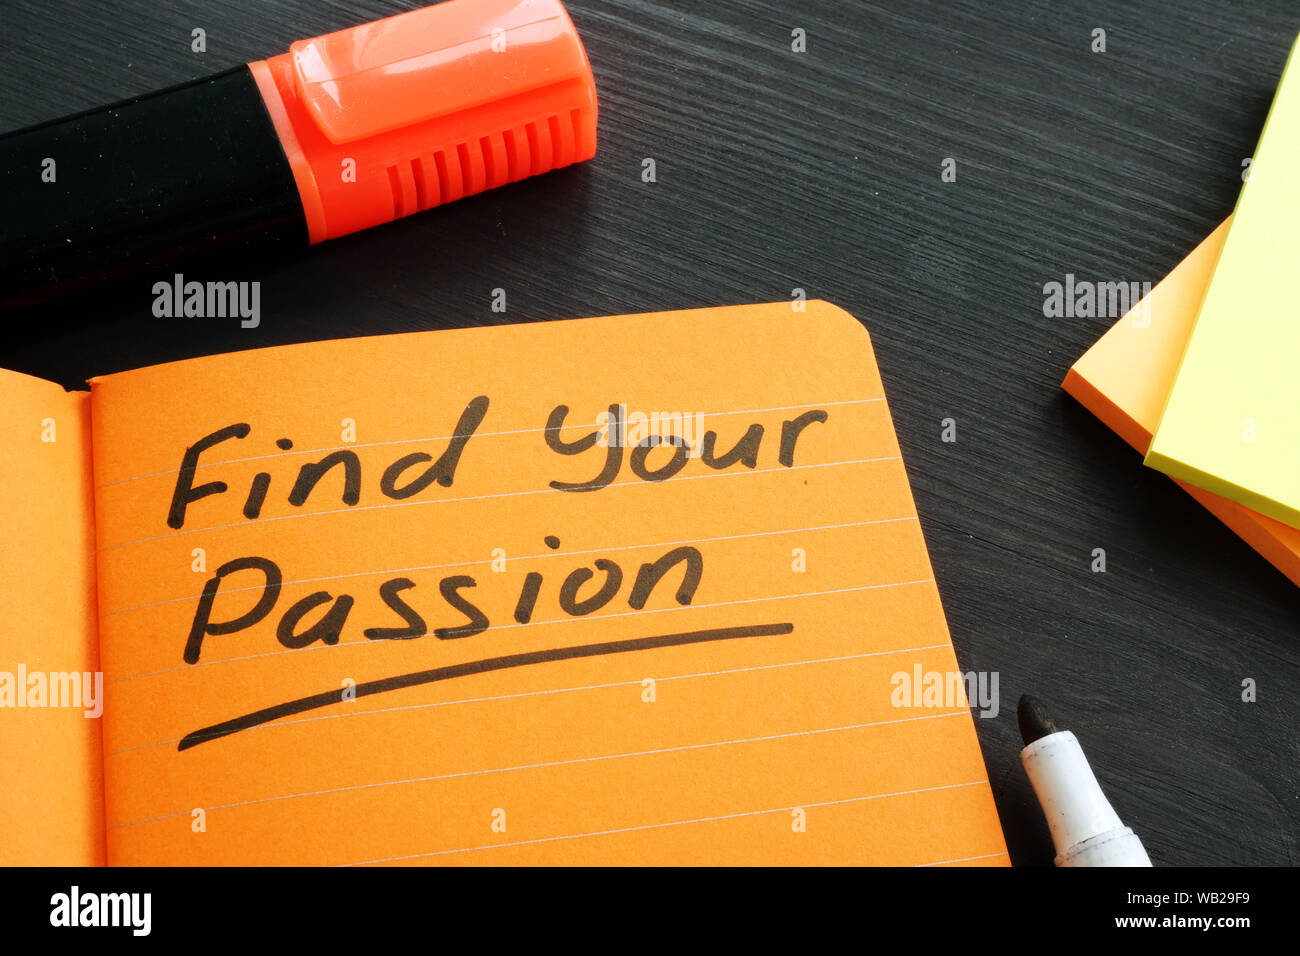 Find your passion sign in the book. Purpose and life goal concept. Stock Photo